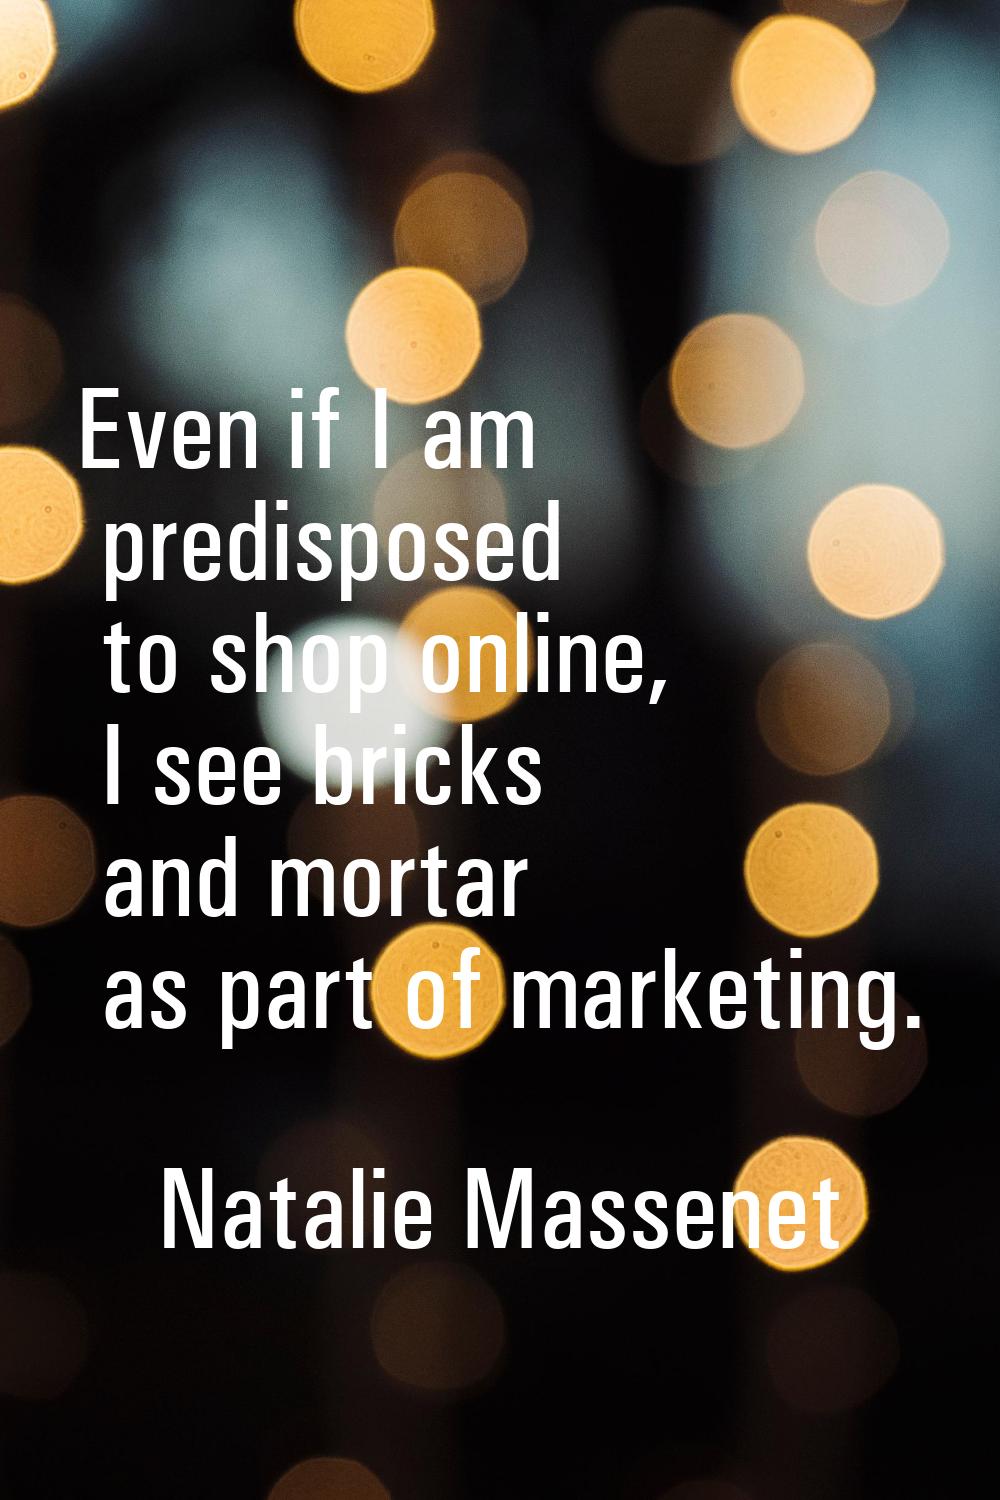 Even if I am predisposed to shop online, I see bricks and mortar as part of marketing.